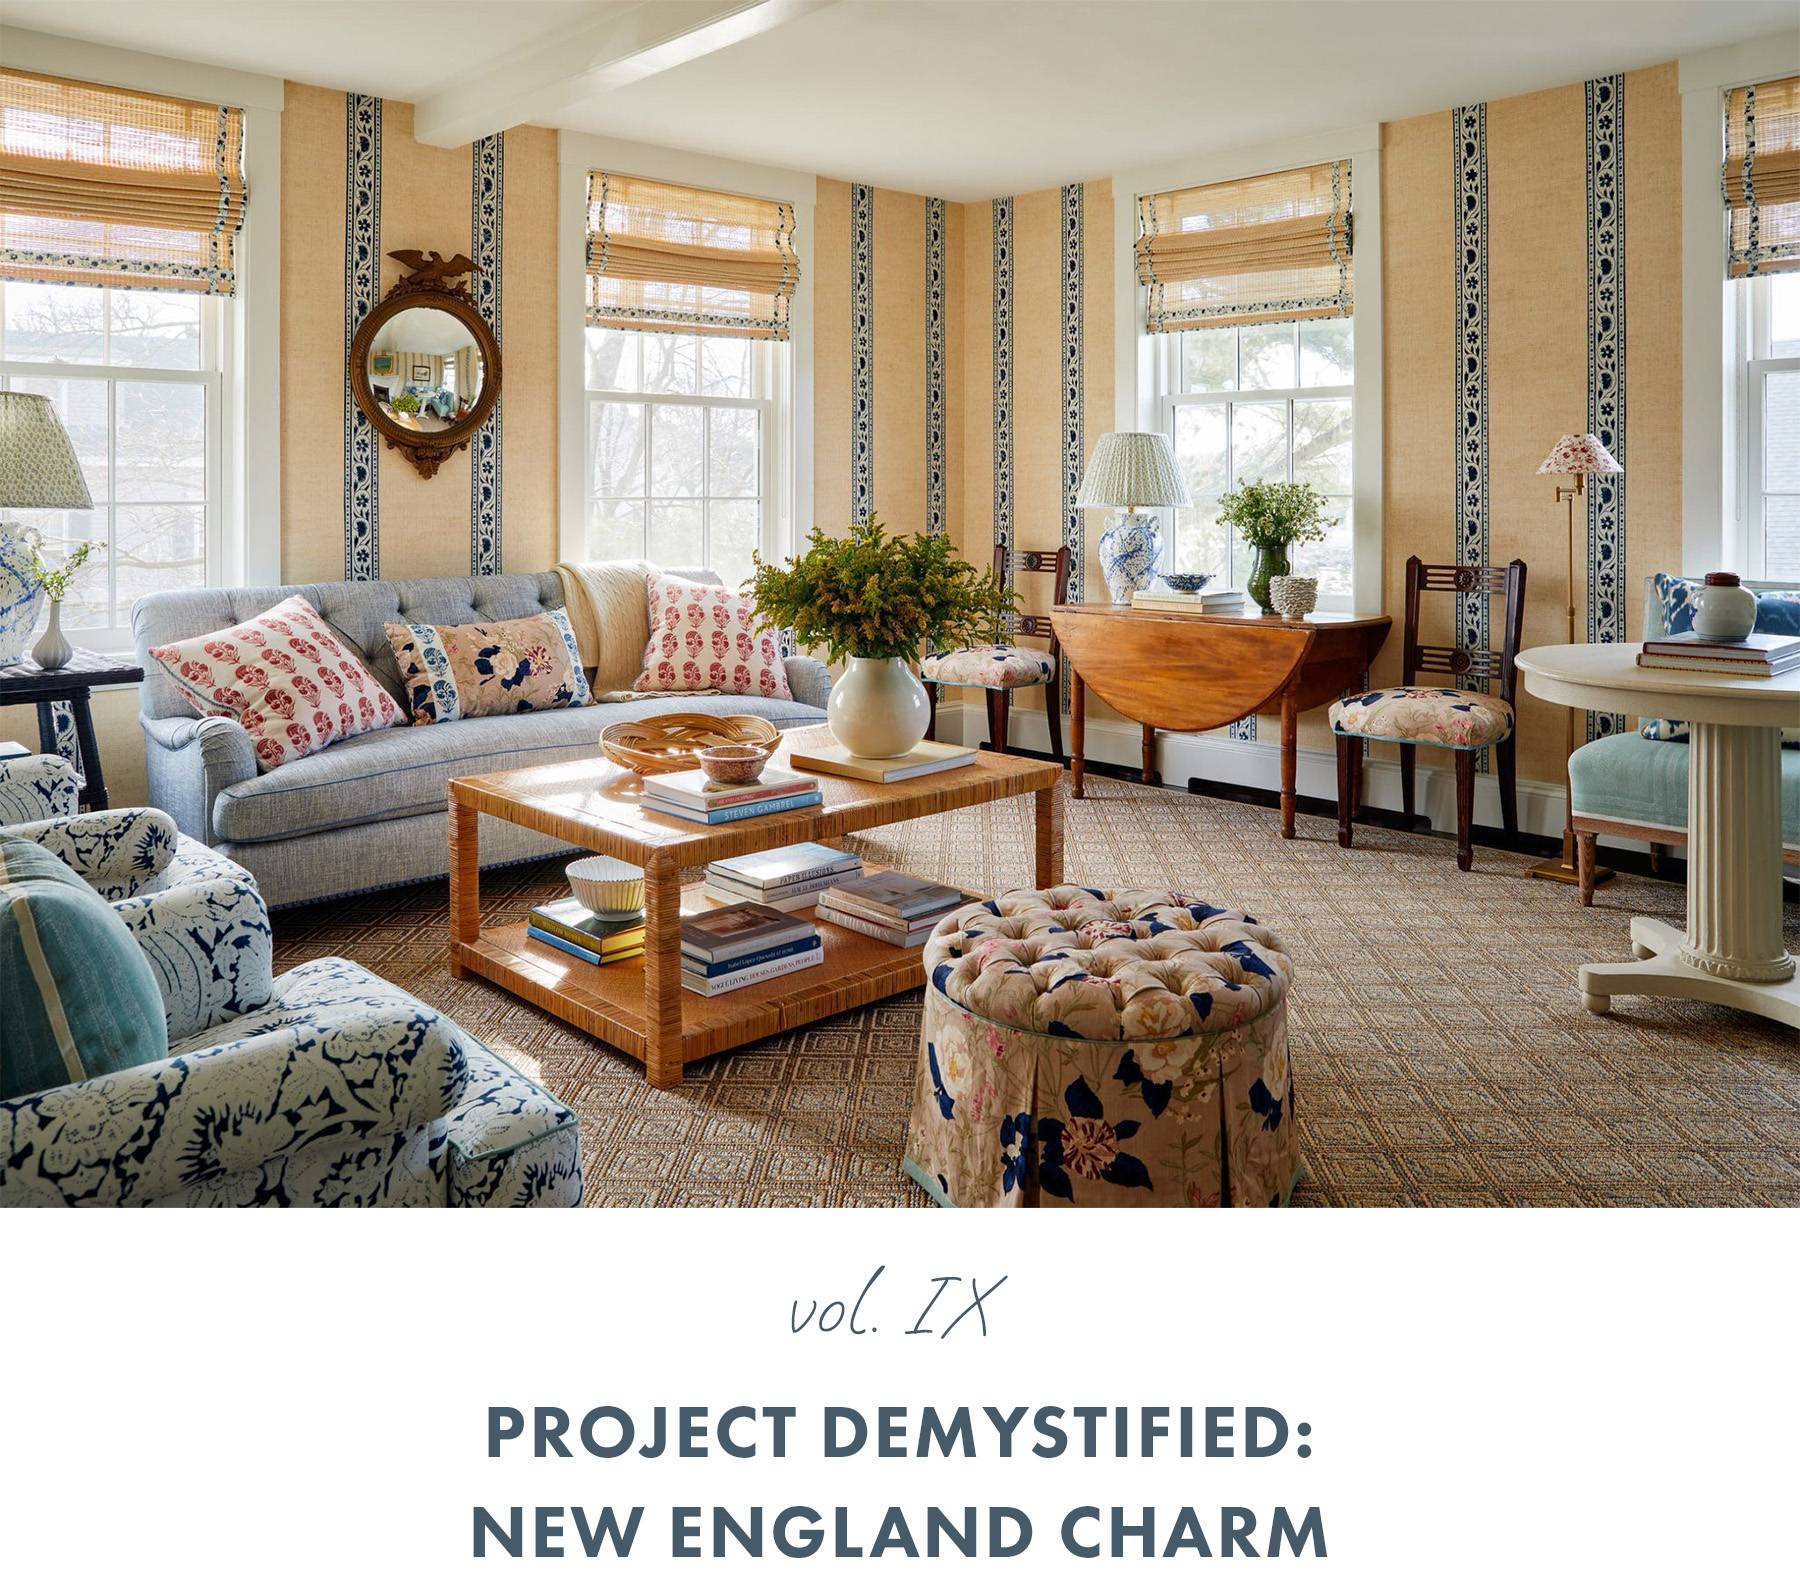 Vol 9: Project Demystified: New England Charm